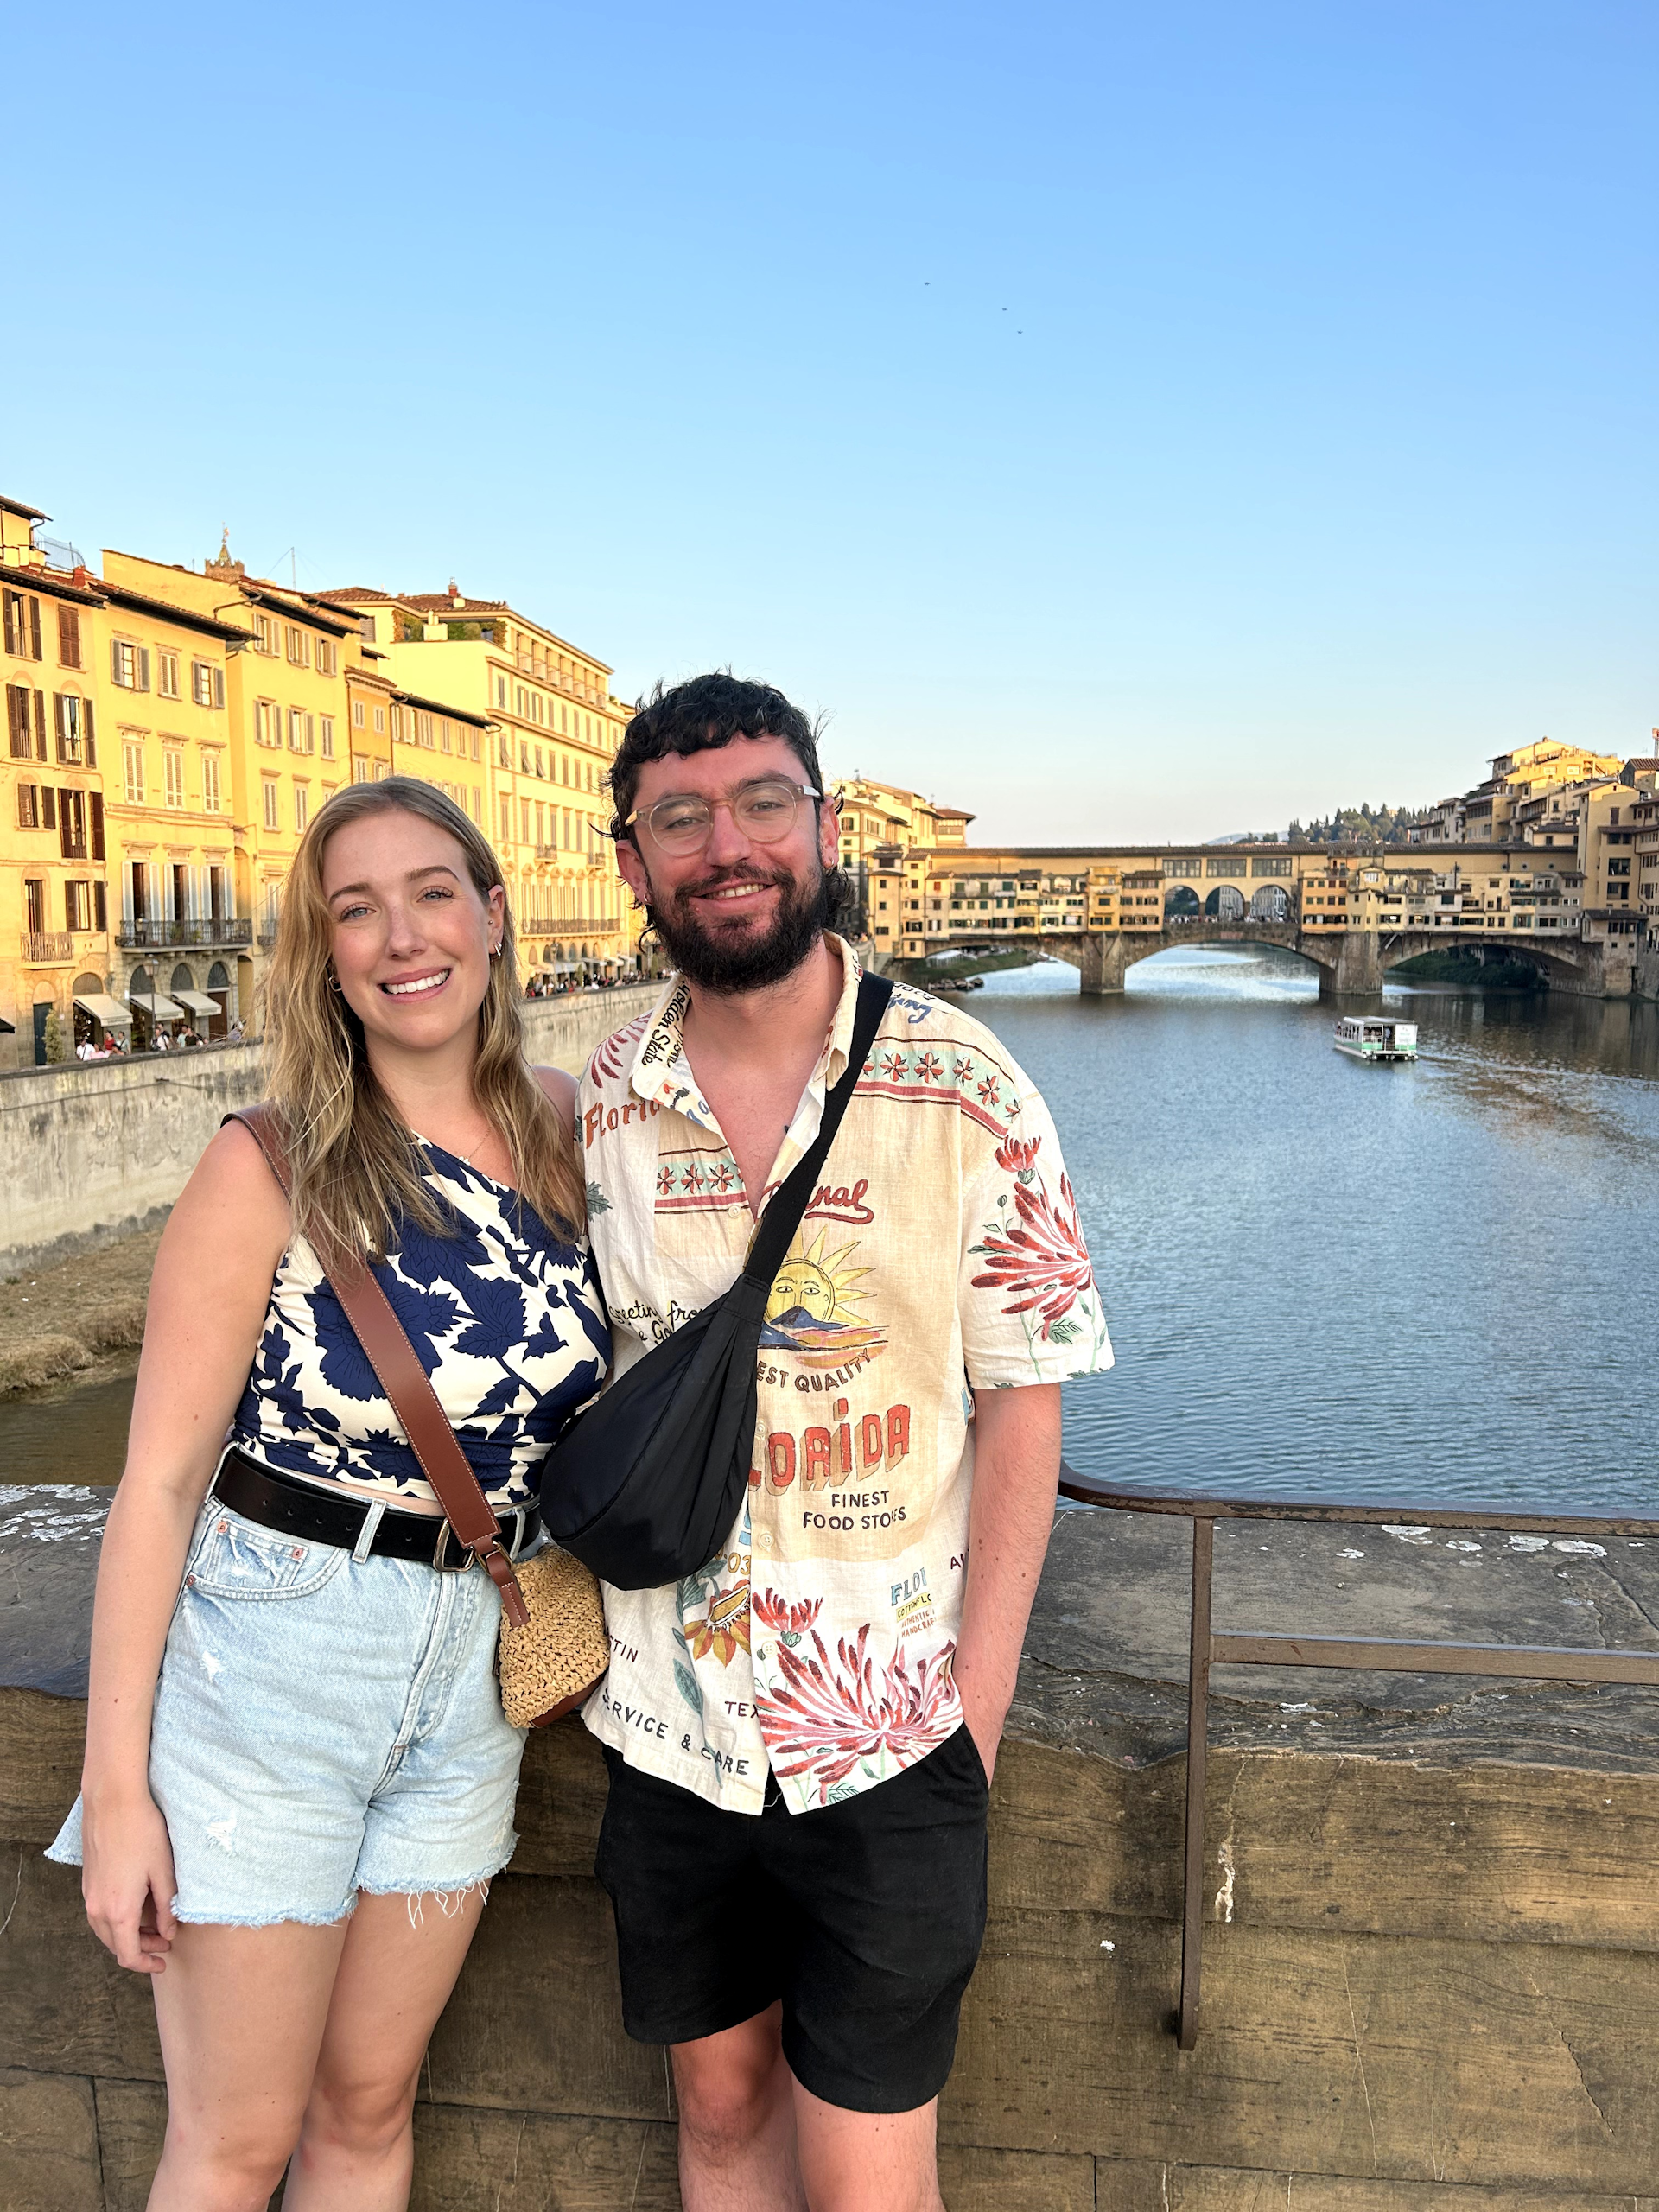 Article author Conall and his partner Amy stand and smile on a bridge in Florence with the river and city in the background